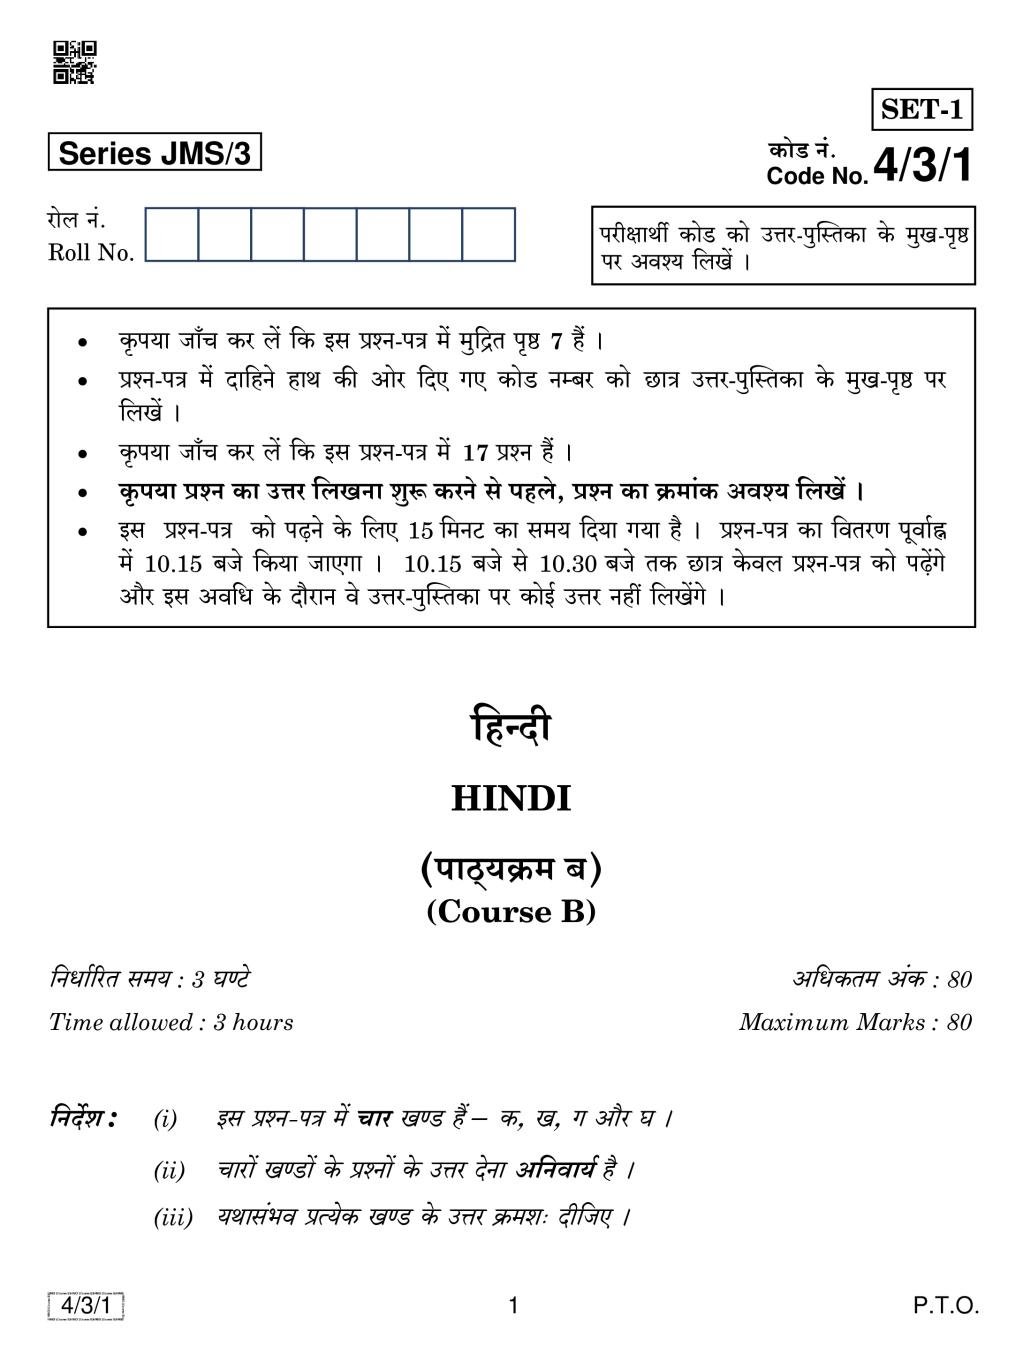 CBSE Class 10 Hindi Course B Question Paper 2019 Set 3 - Page 1